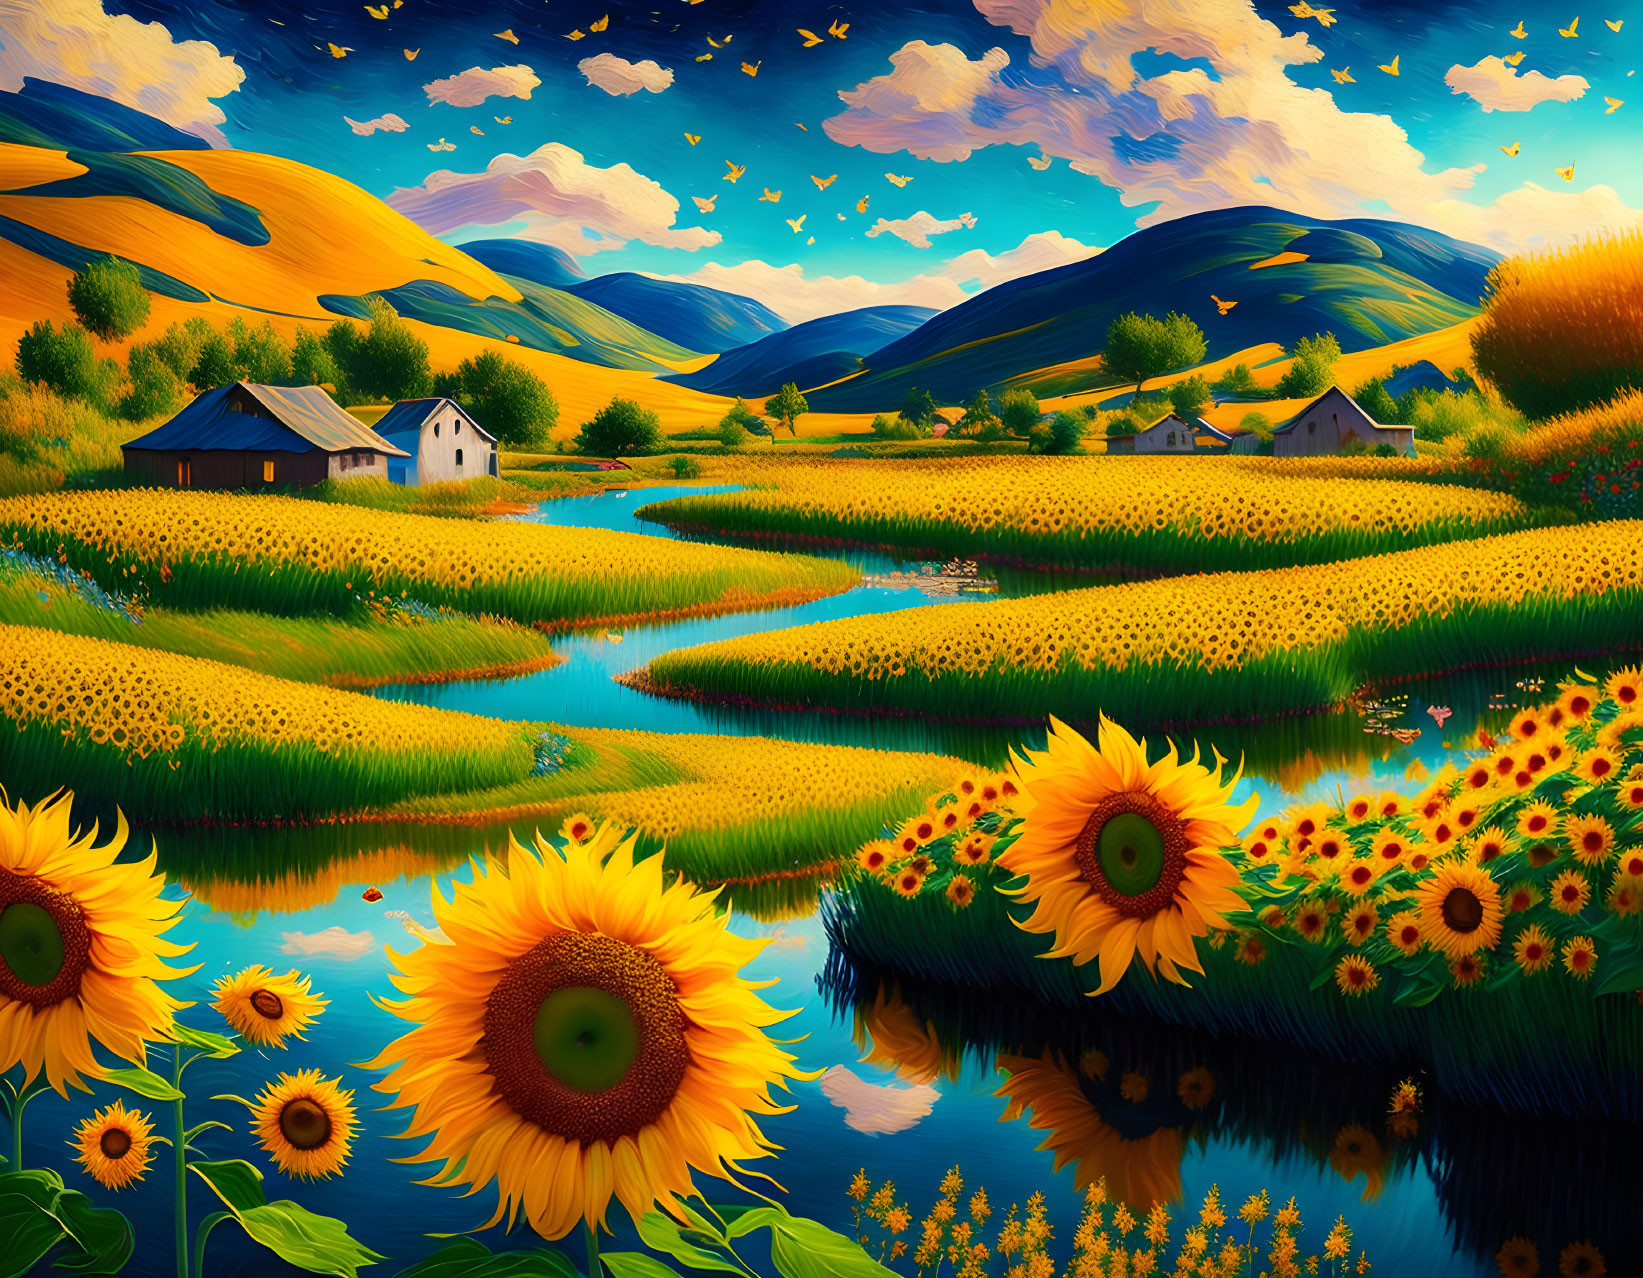 Scenic landscape painting with sunflowers, river, hills, cottages, and birds